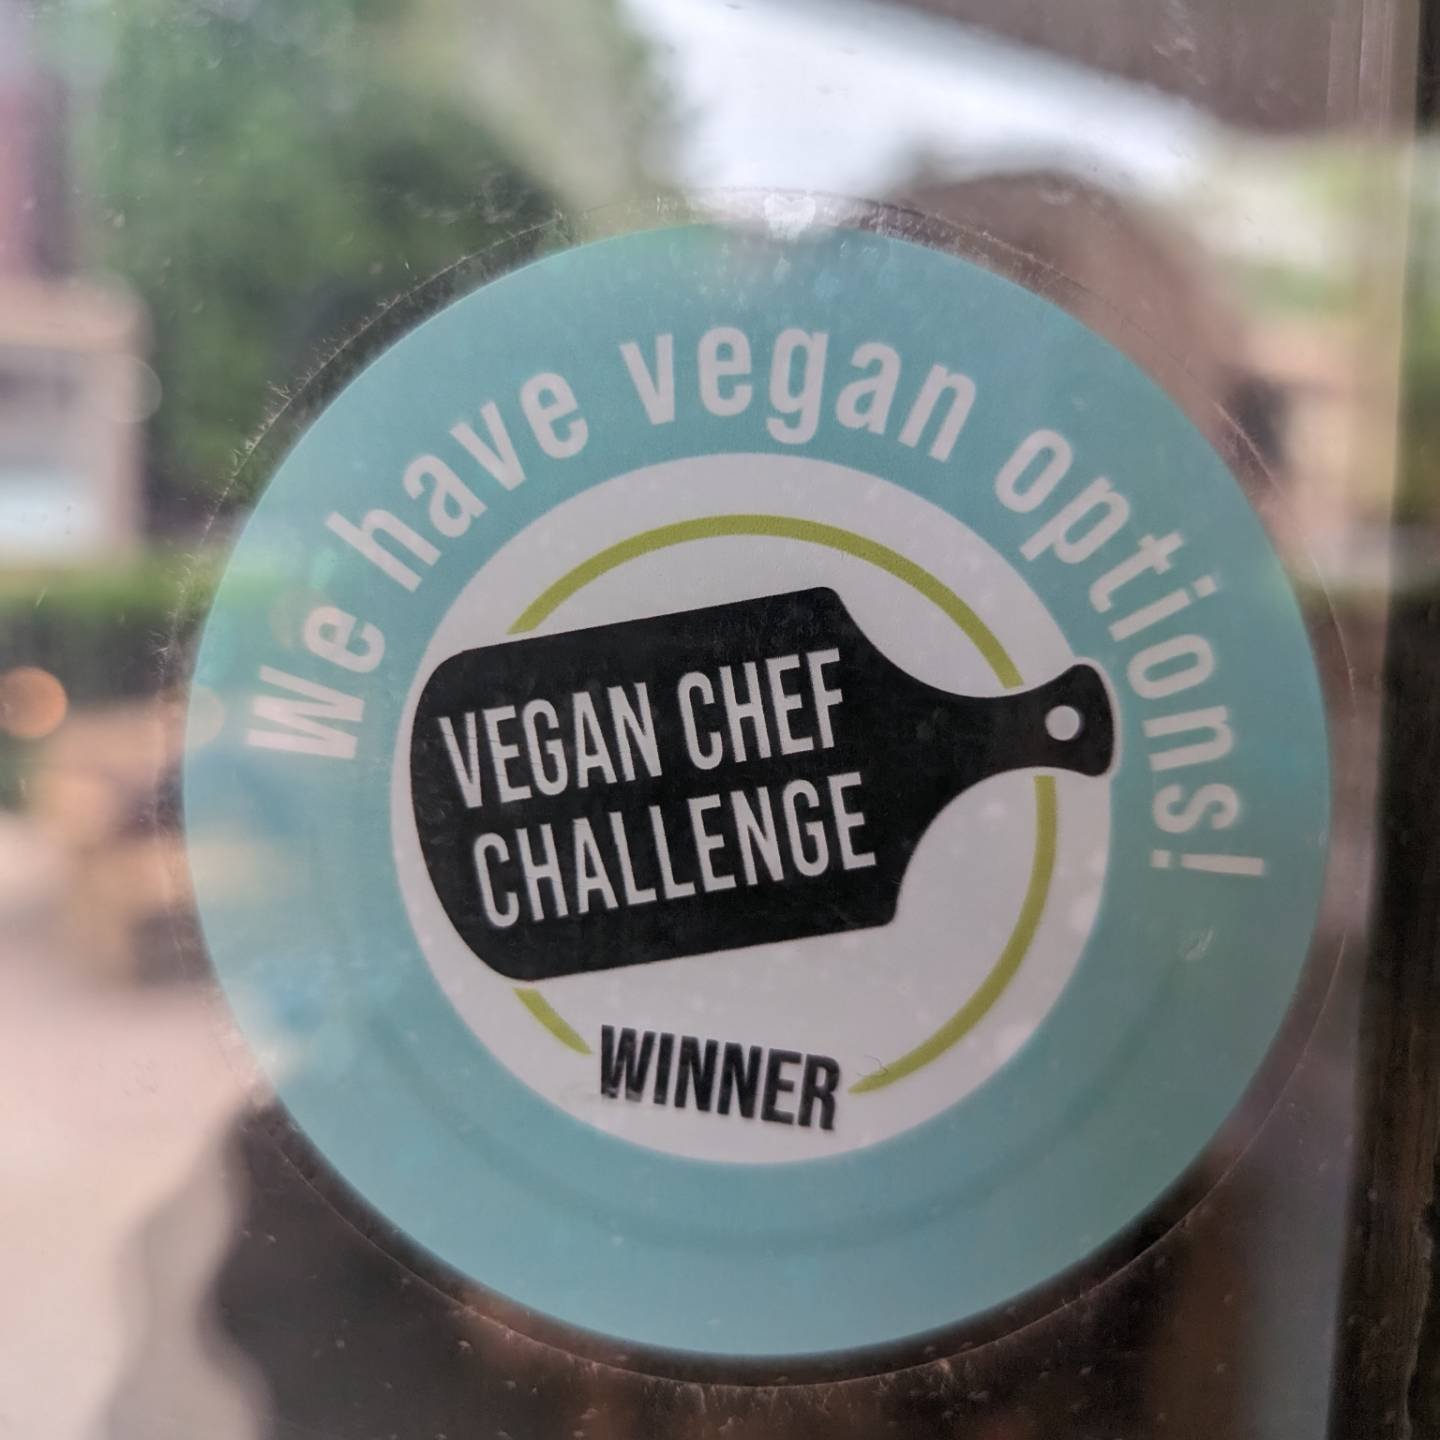 Aww we got cool stuff to hang up for our Vegan Chef Challenge win! 💕💕
I'm still so stoked about this. ✨✨
If you haven't tried our Musubi yet, you should! 
It went over so well, we decided to keep it on the menu.
So it's here to stay, along with the